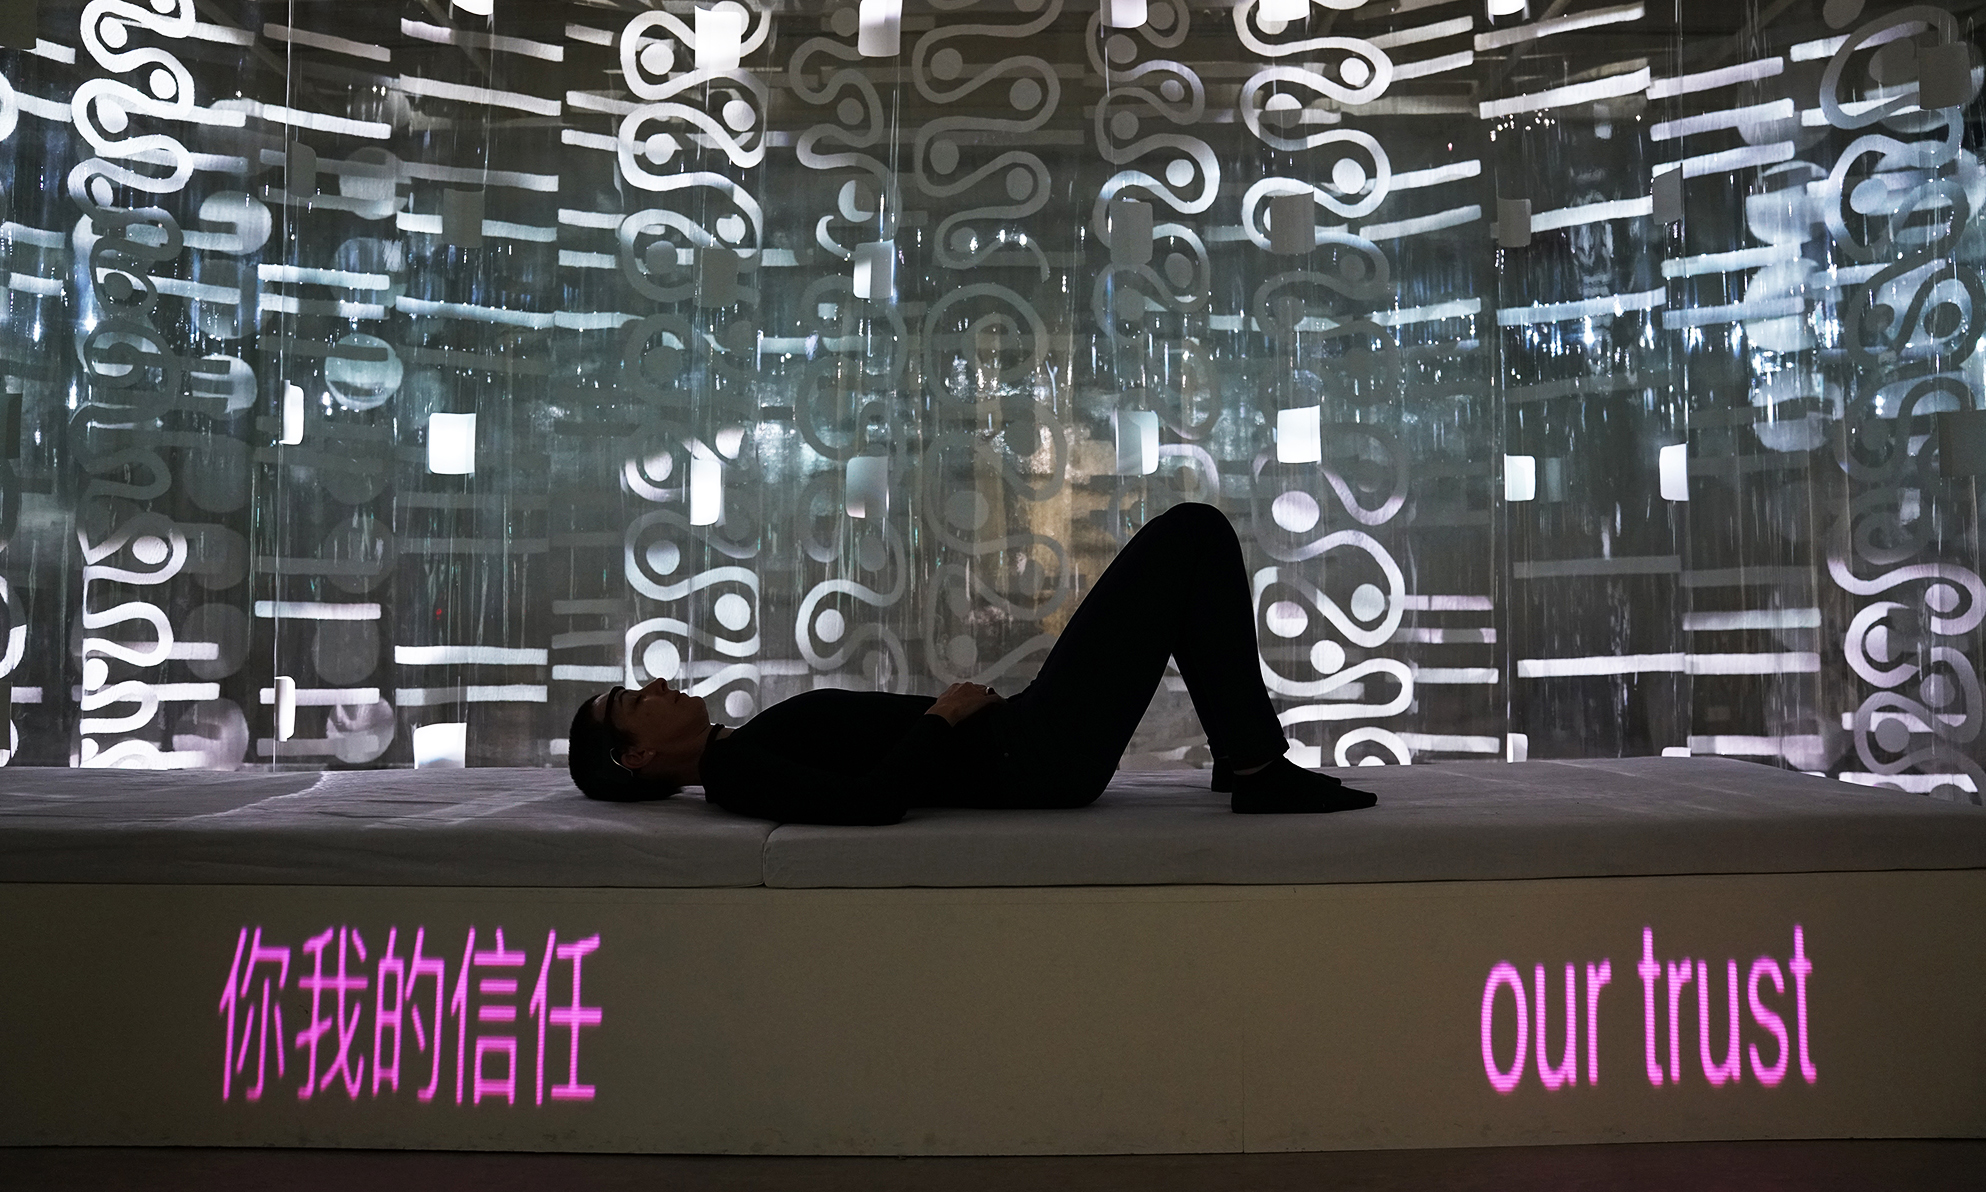 A still from installation 'Dream 2.2' on display at the National Taiwan Museum of Fine Arts, 2018.